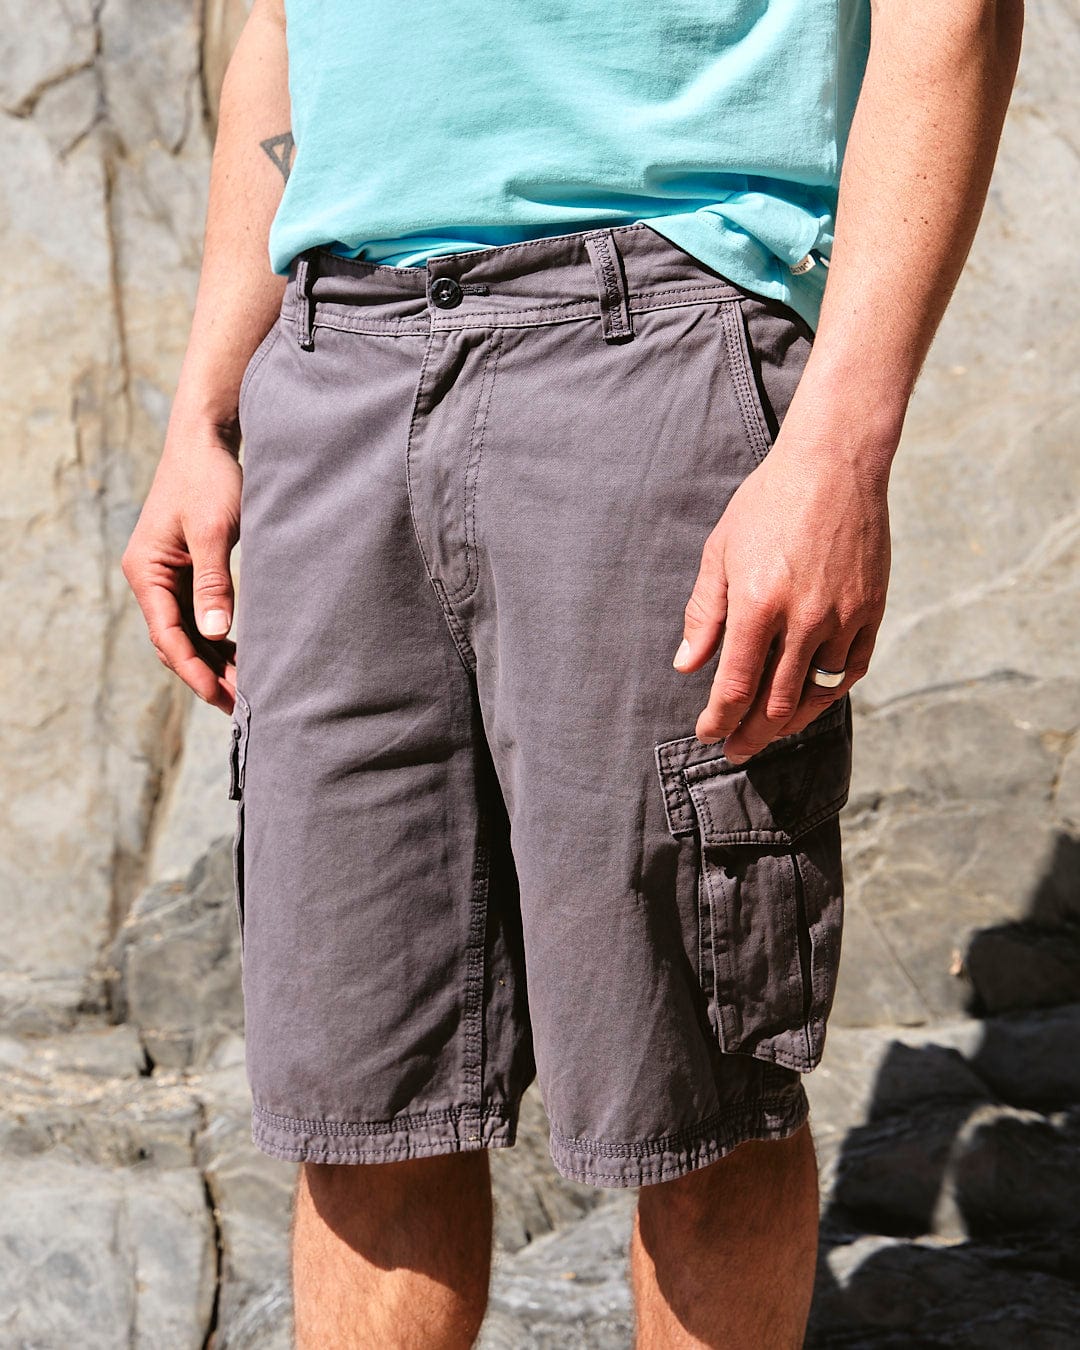 A person standing in Penwith II - Mens Cargo Shorts - Dark Grey by Saltrock with cargo patch pockets against a rocky background.